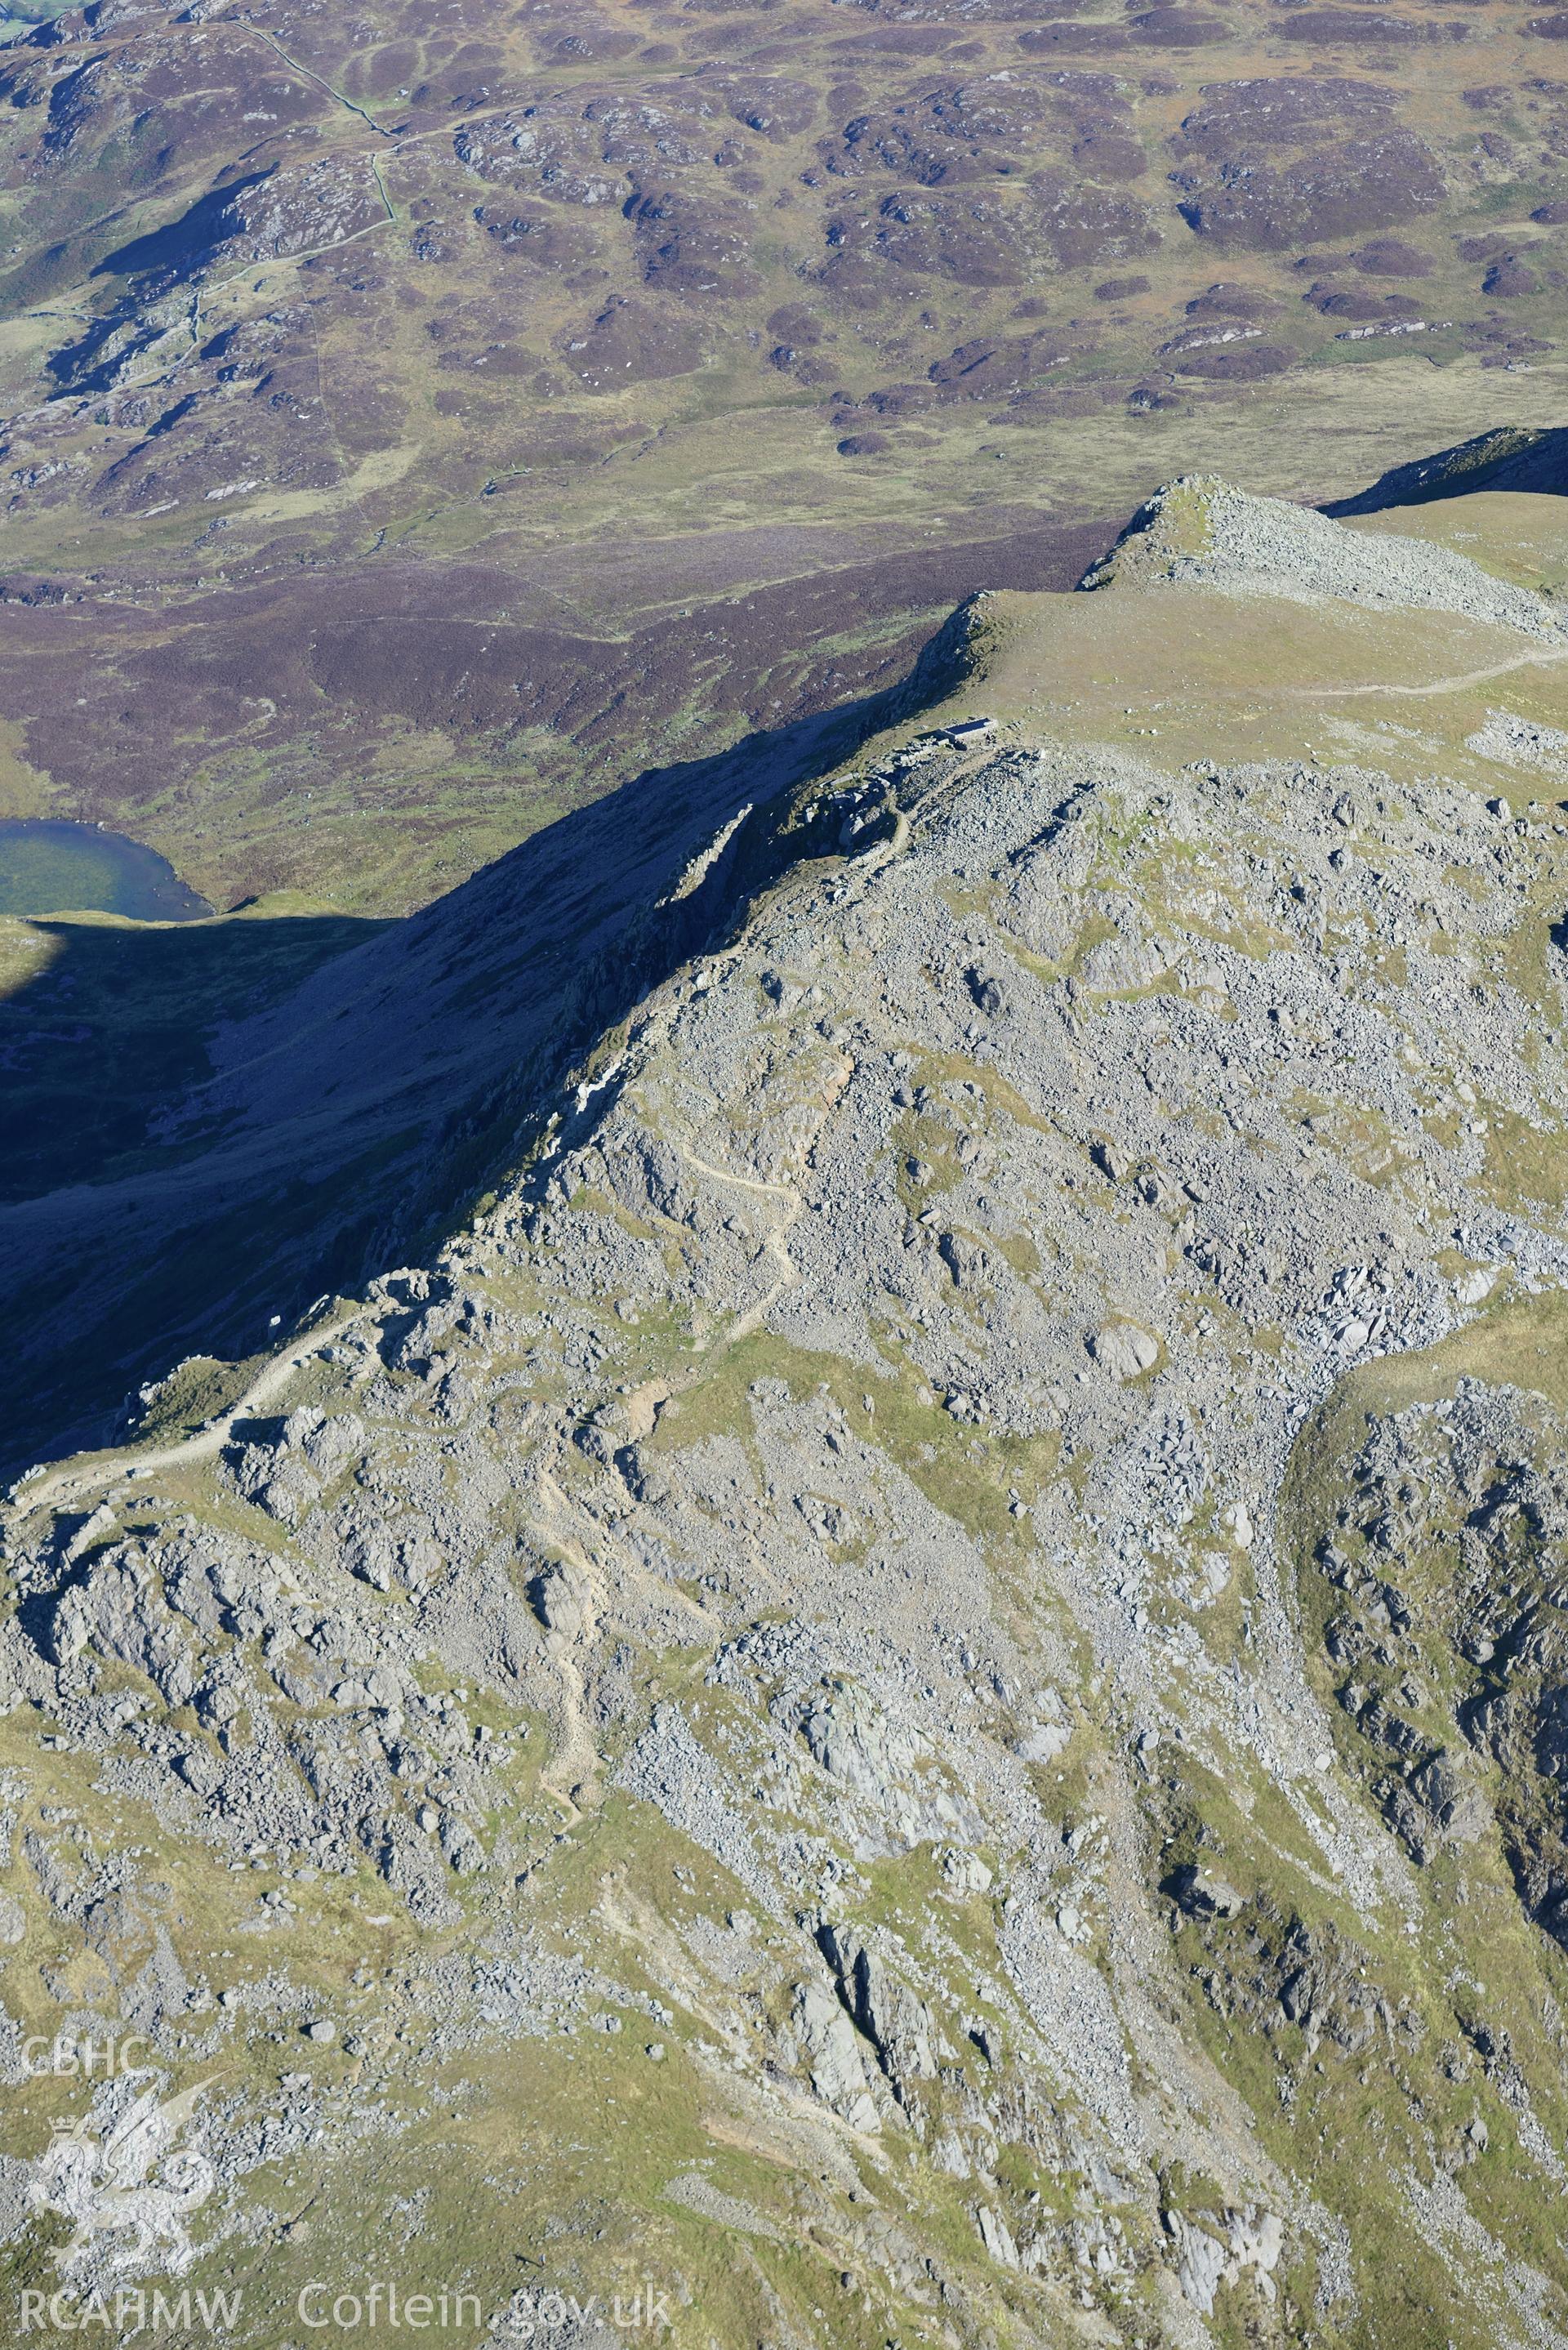 Penygadair - the summit of Cadair Idris. Oblique aerial photograph taken during the Royal Commission's programme of archaeological aerial reconnaissance by Toby Driver on 2nd October 2015.